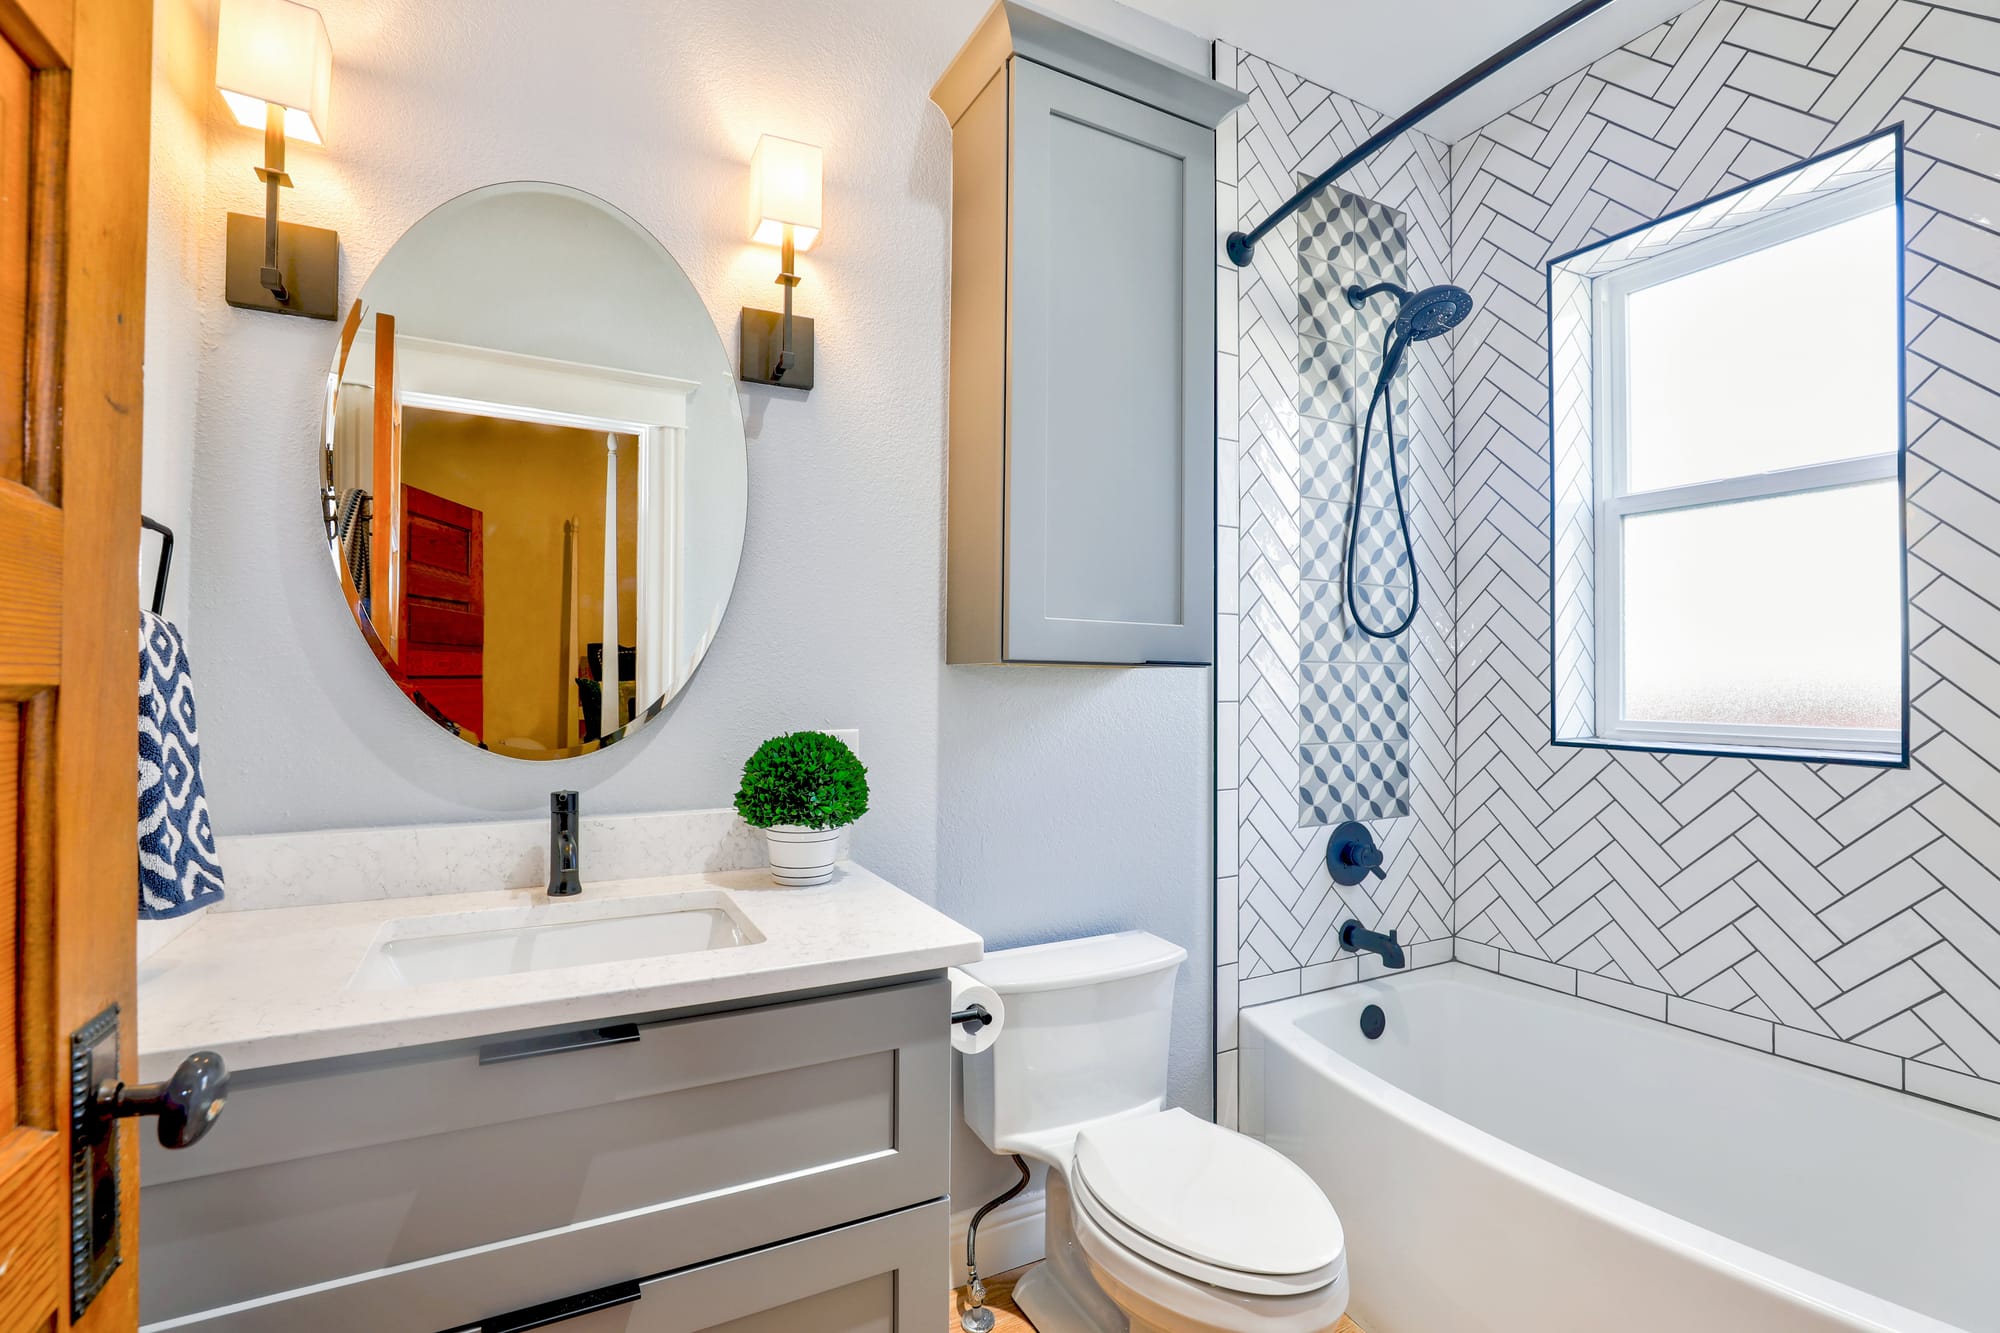 6 Ways You Can Improve Your Bathroom With Quick Updates